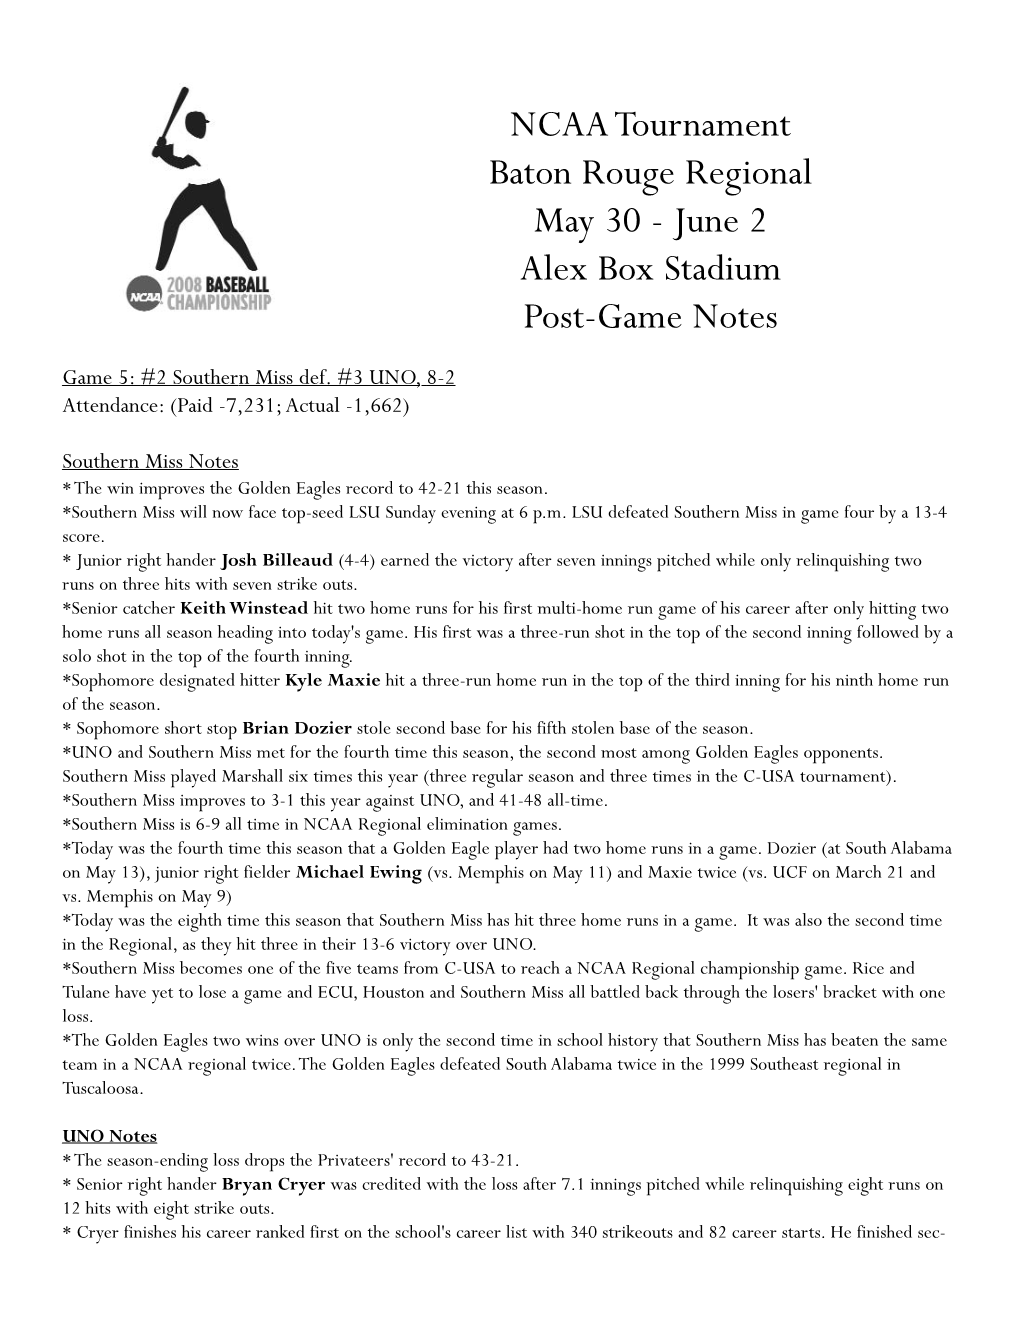 Game 5 Notes.Qxd